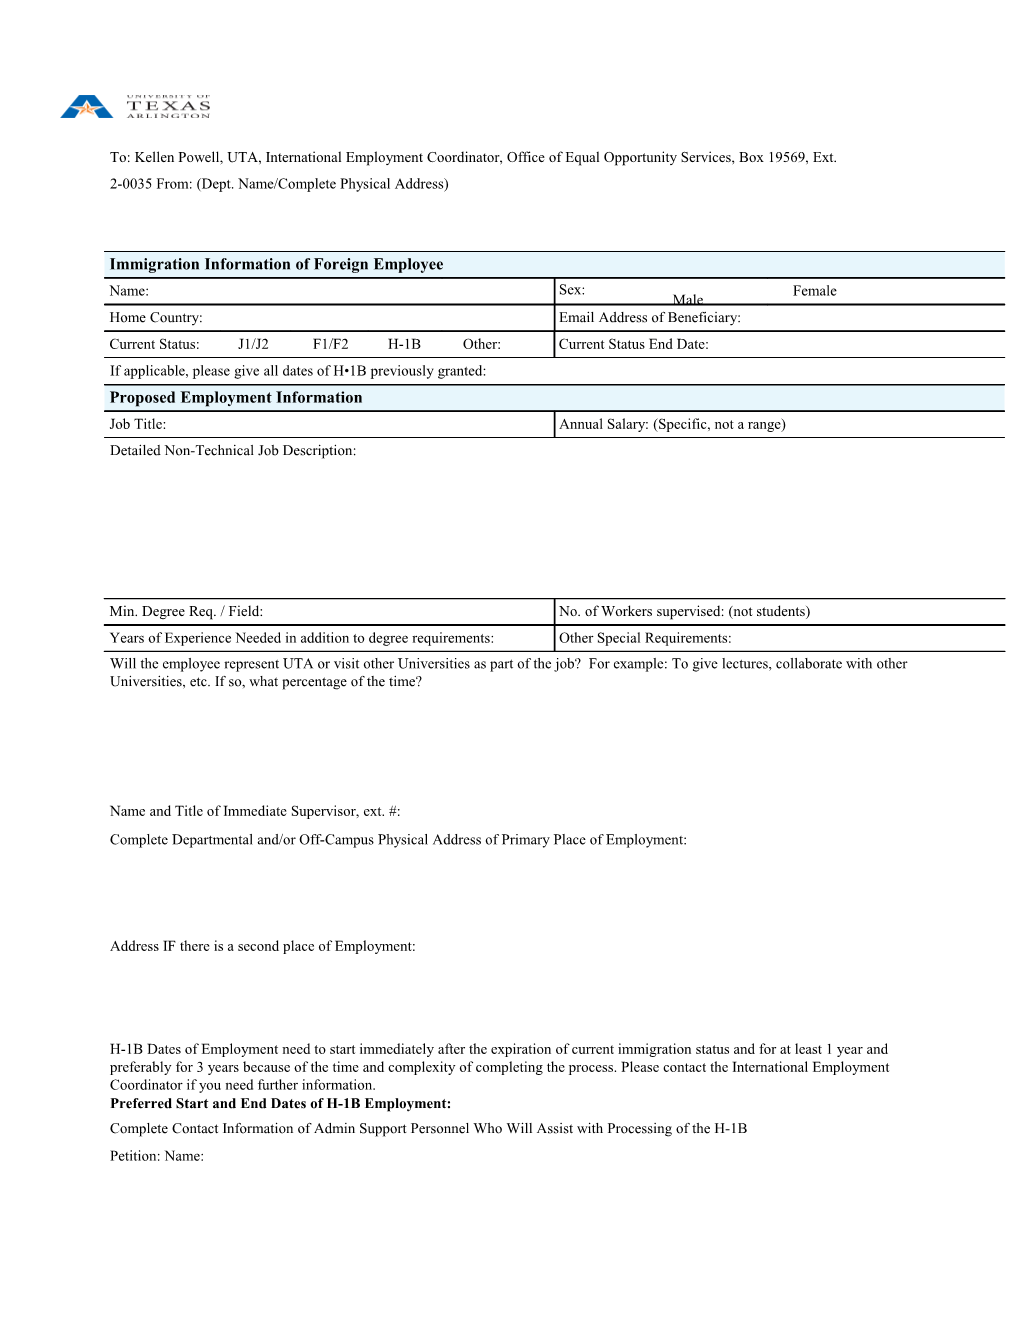 Form 22-2: Request to Initiate H-1B Petition